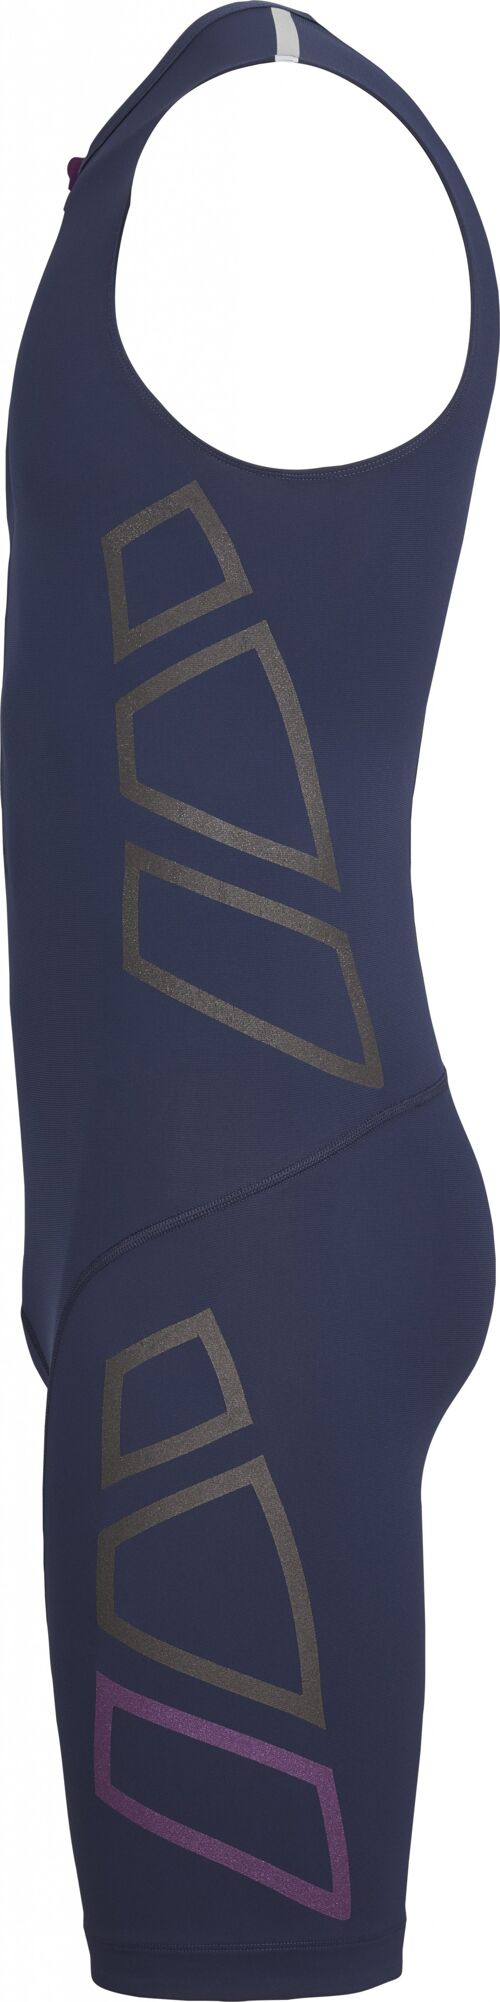 DuraForce Indoor Cycling Suit - Tempest Blue